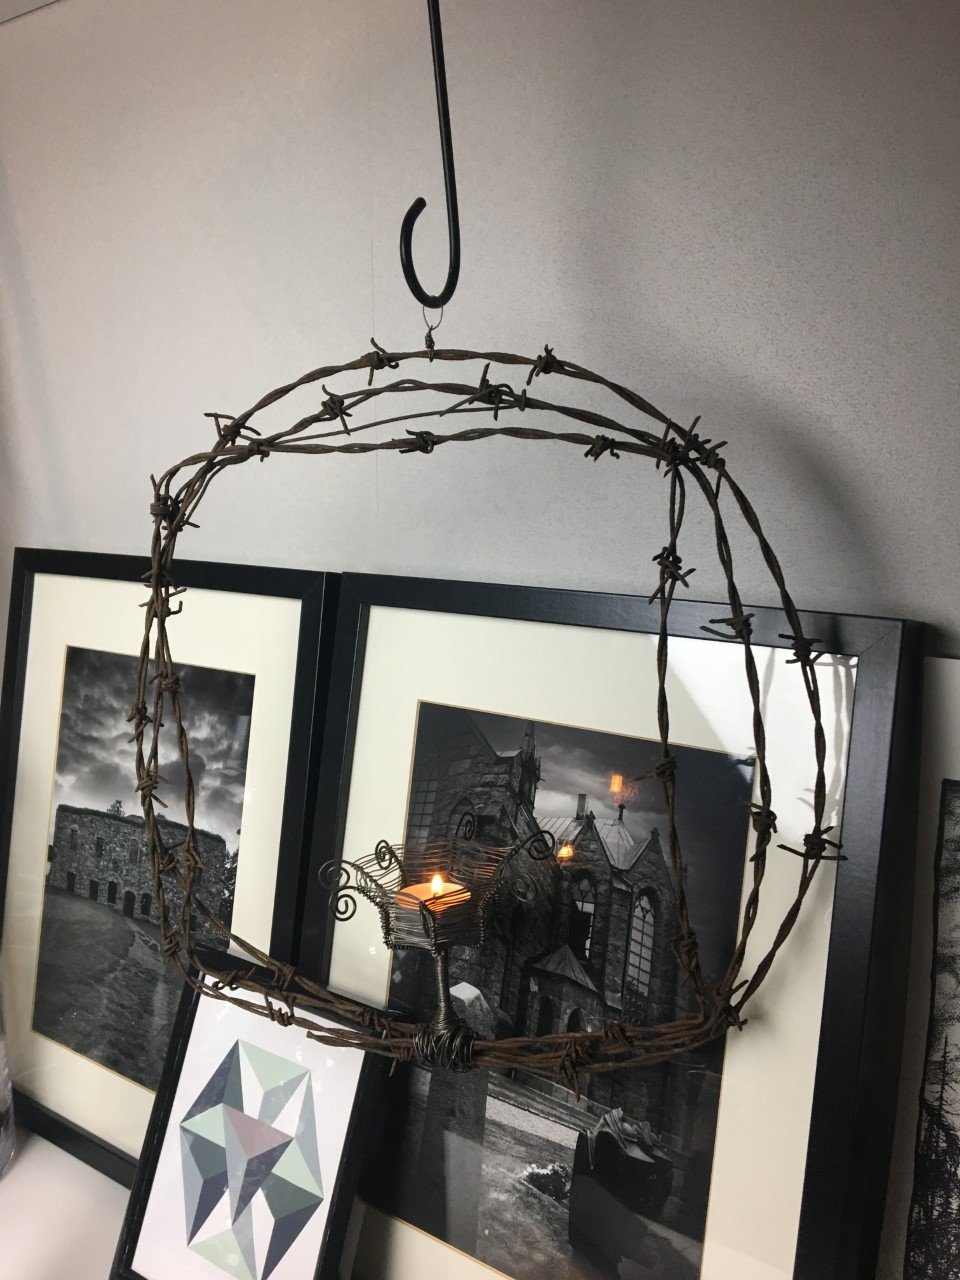 Image of One of a kind Barb wire light pendant